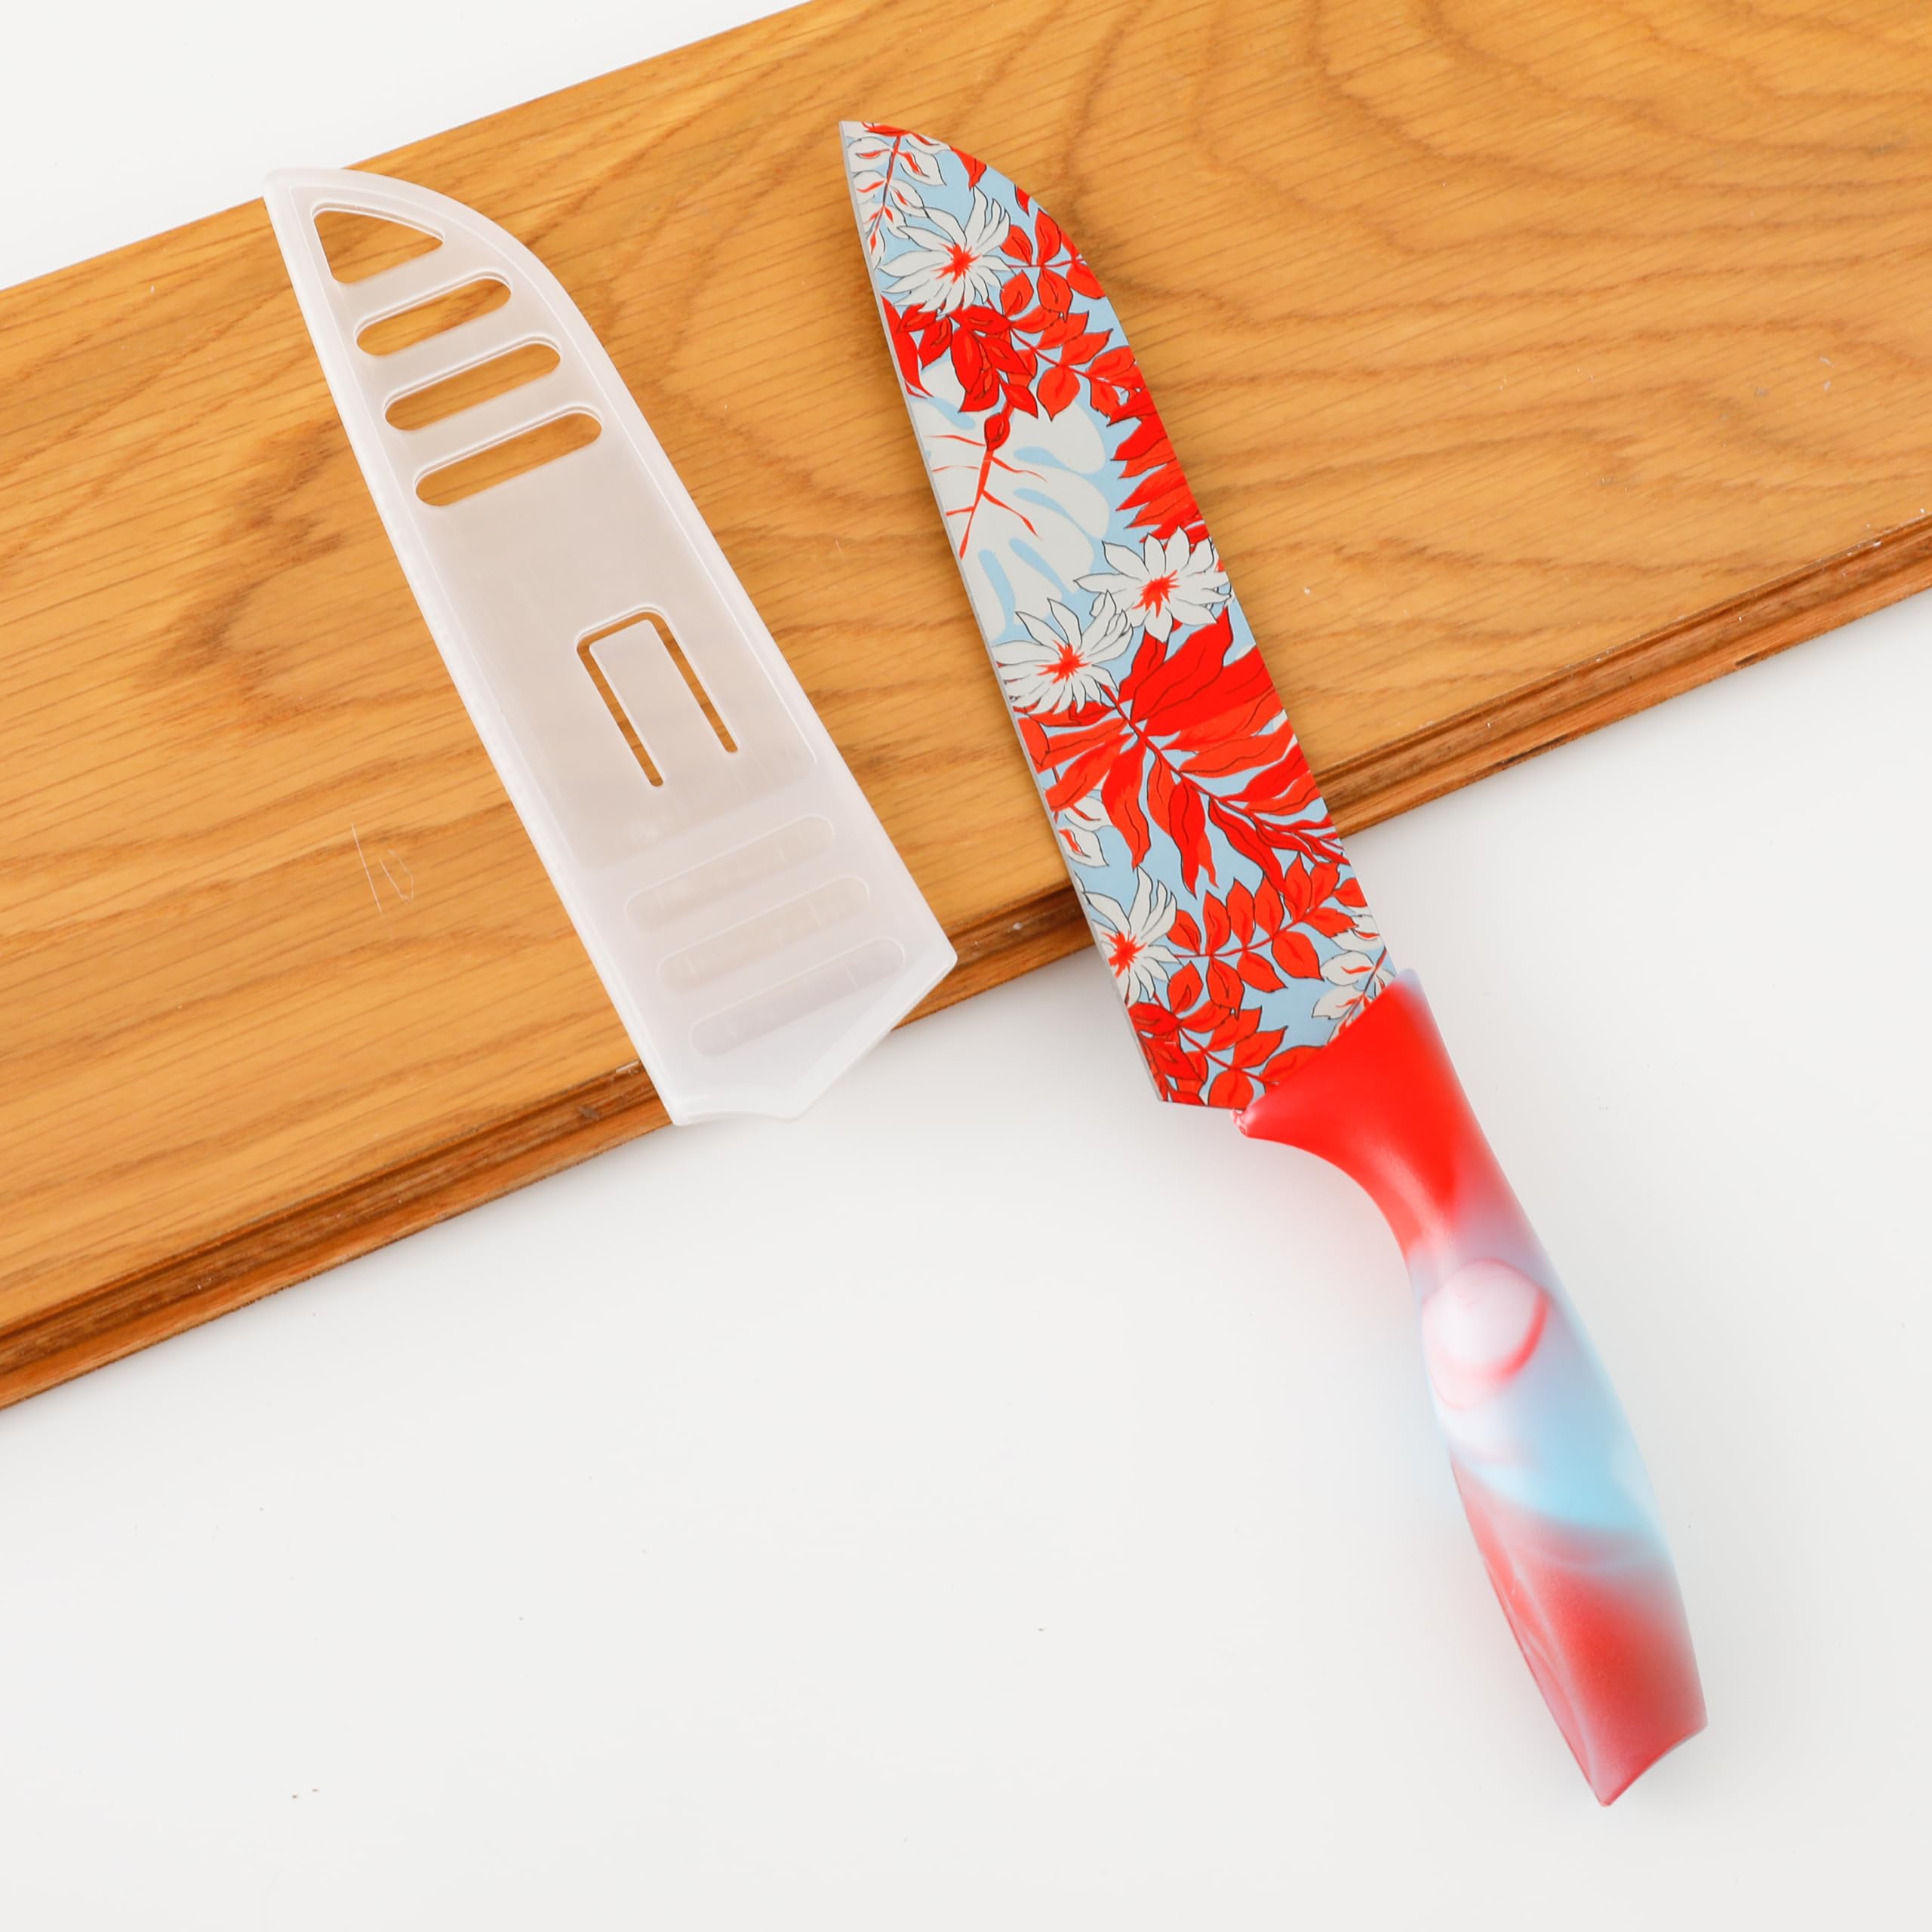 The Better Home Knife Kitchen Knife Chef Knife Color Printing Santoku Knife & Non-Slip Handle with Blade Cover,7 inch, Stainless Steel|Utility Knife. (Red Set of 5)